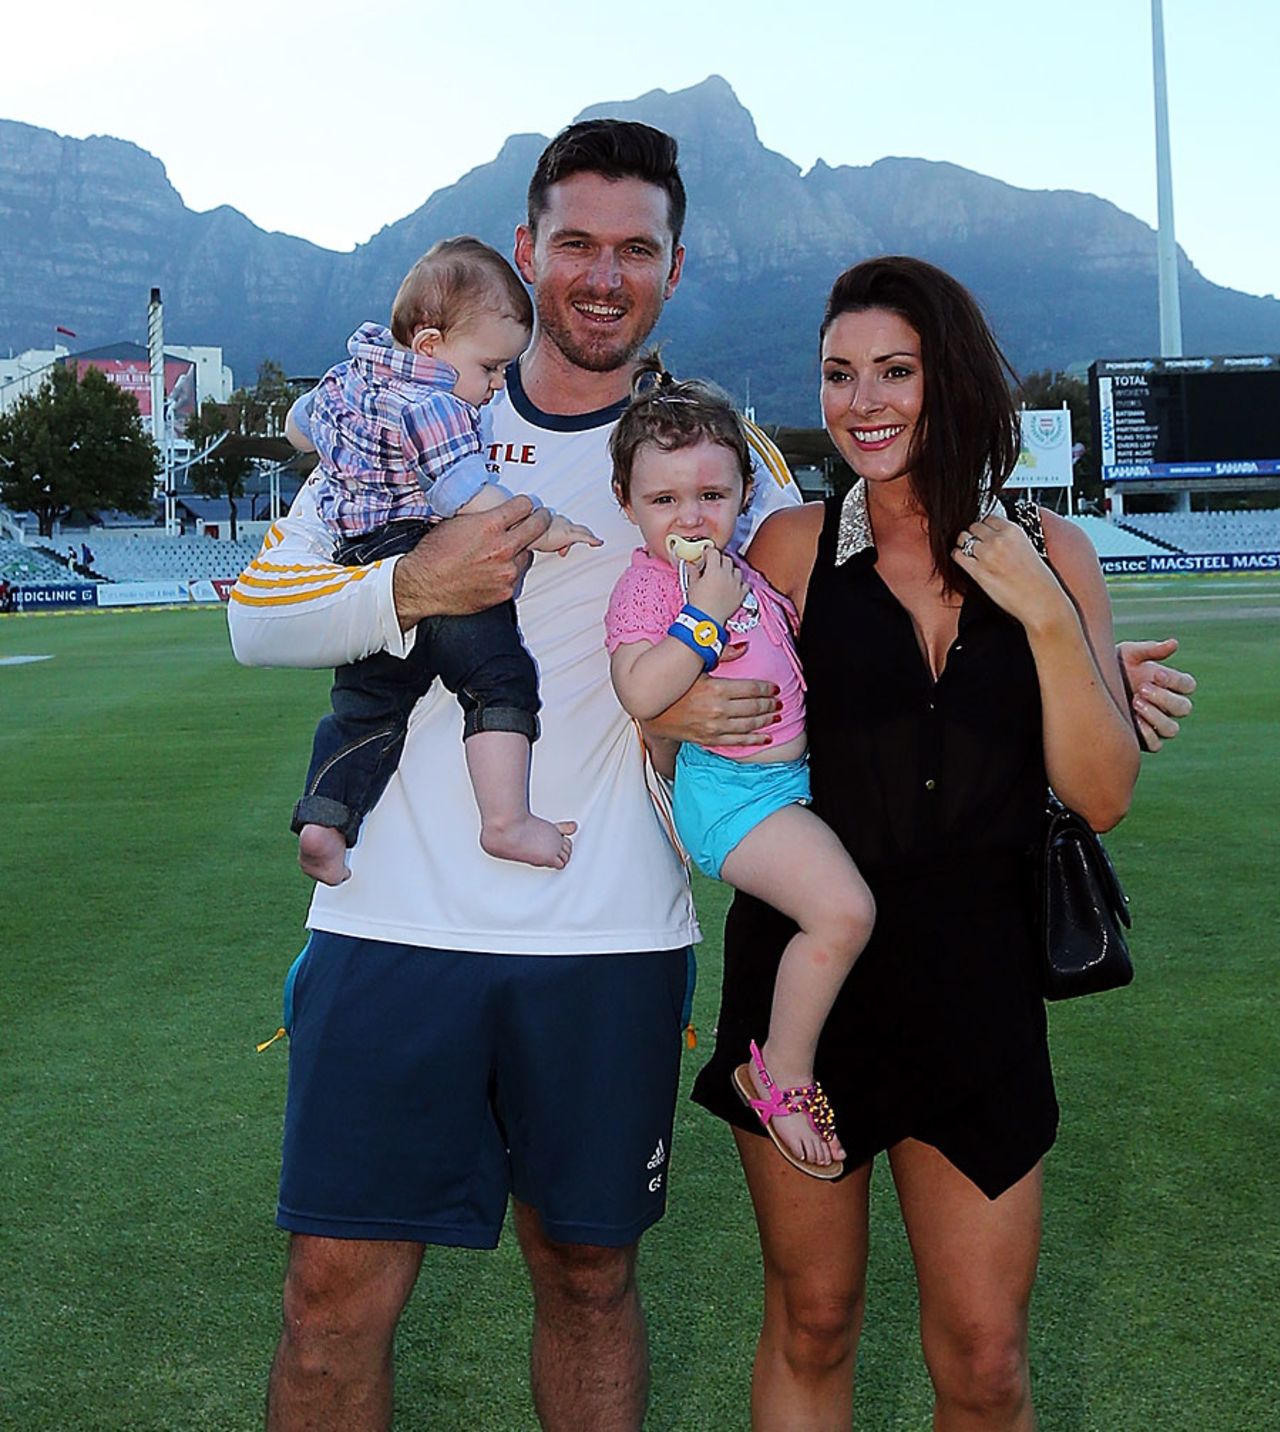 Graeme Smith with his wife and children, South Africa v Australia, 3rd Test, Cape Town, 5th day, March 5, 2014